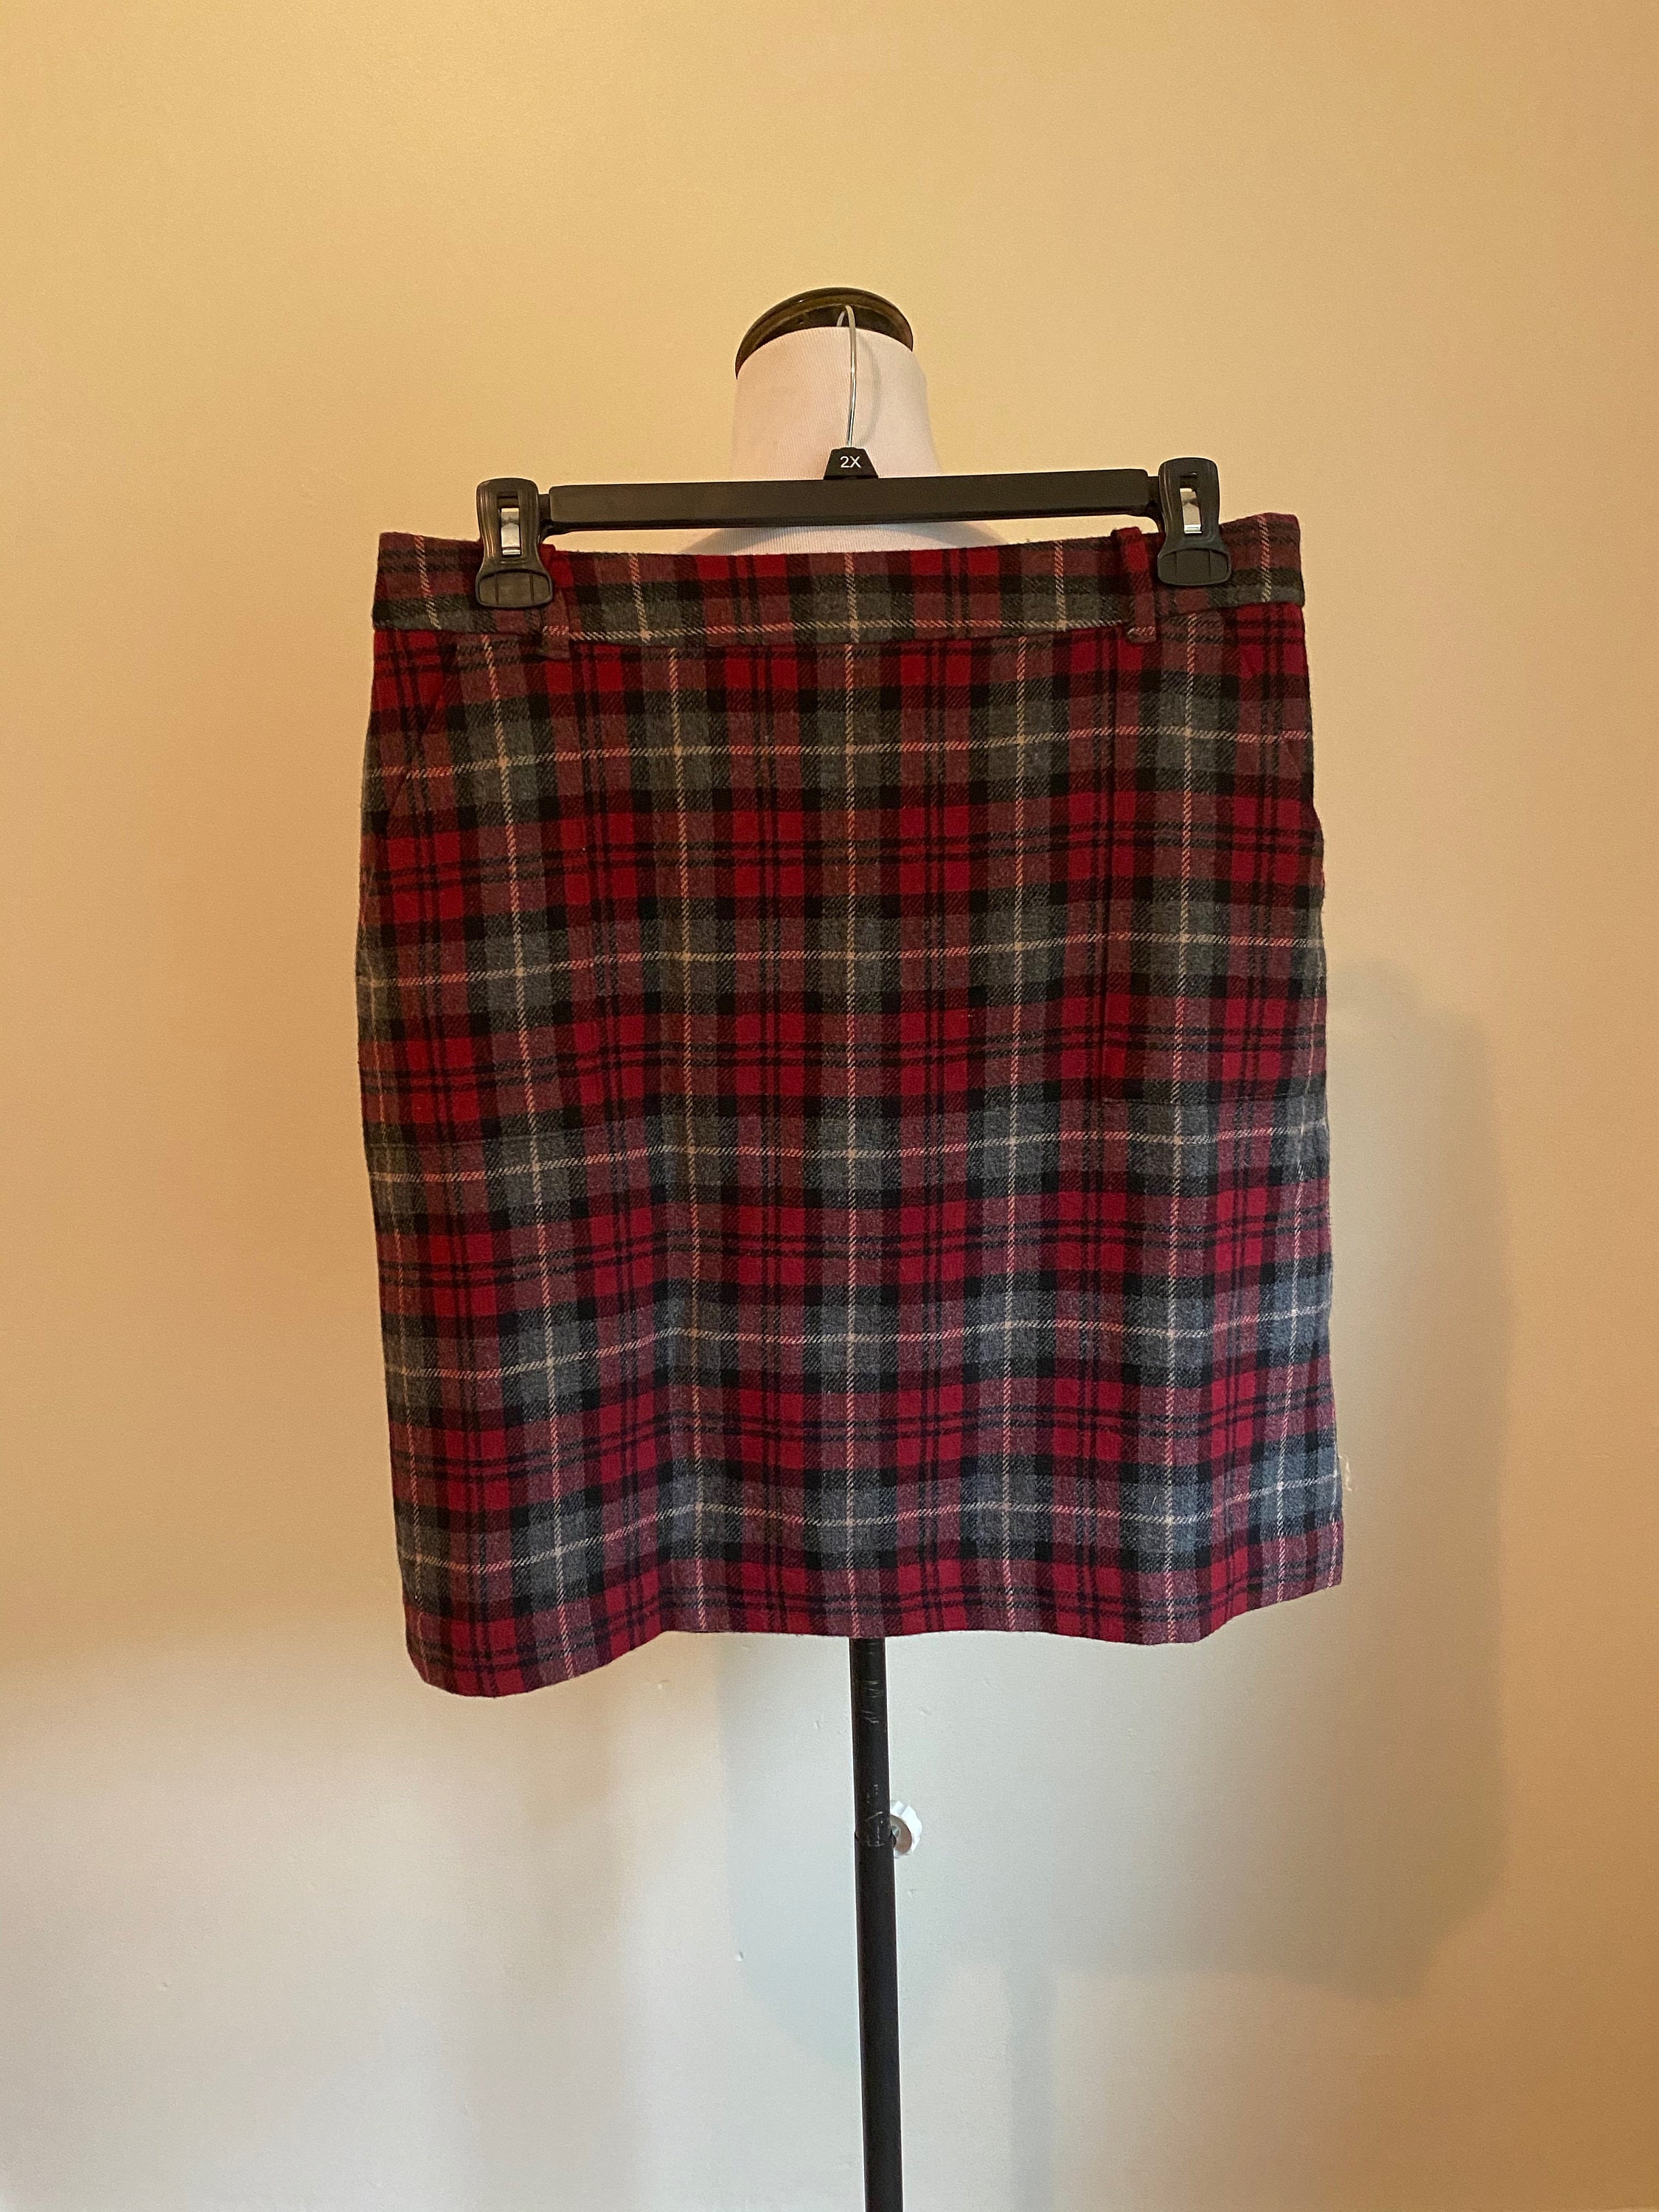 Eddie Bauer Wool Blend Plaid Skirt Size 10, Four Pockets, Two Front Back Buttons